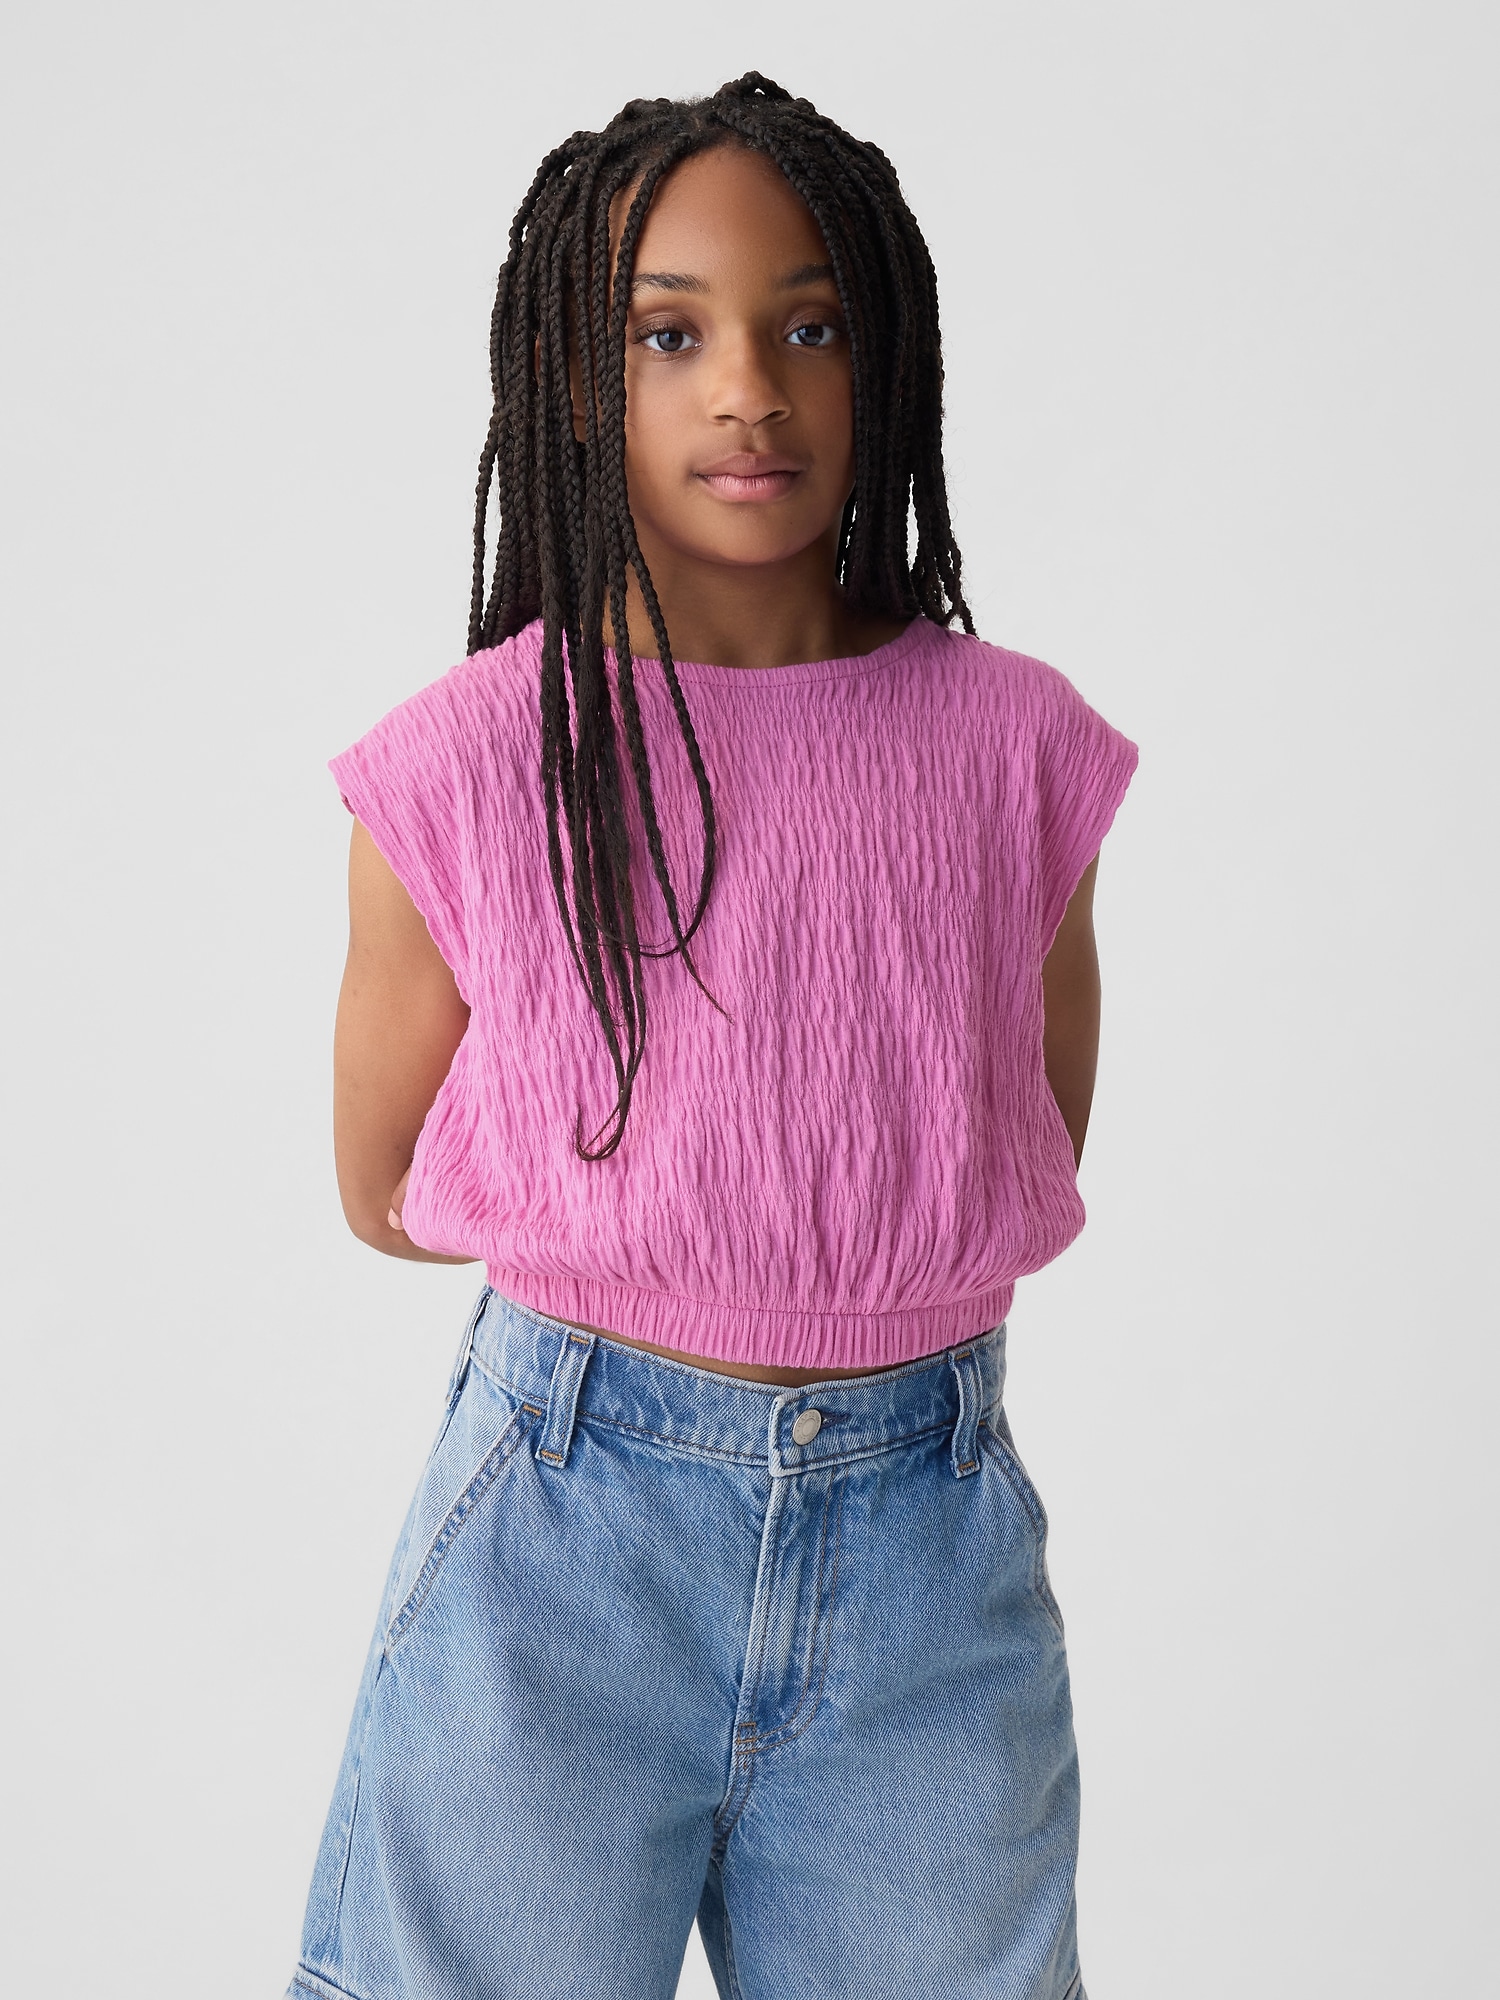 Kids Smocked Cropped Muscle Tank Top